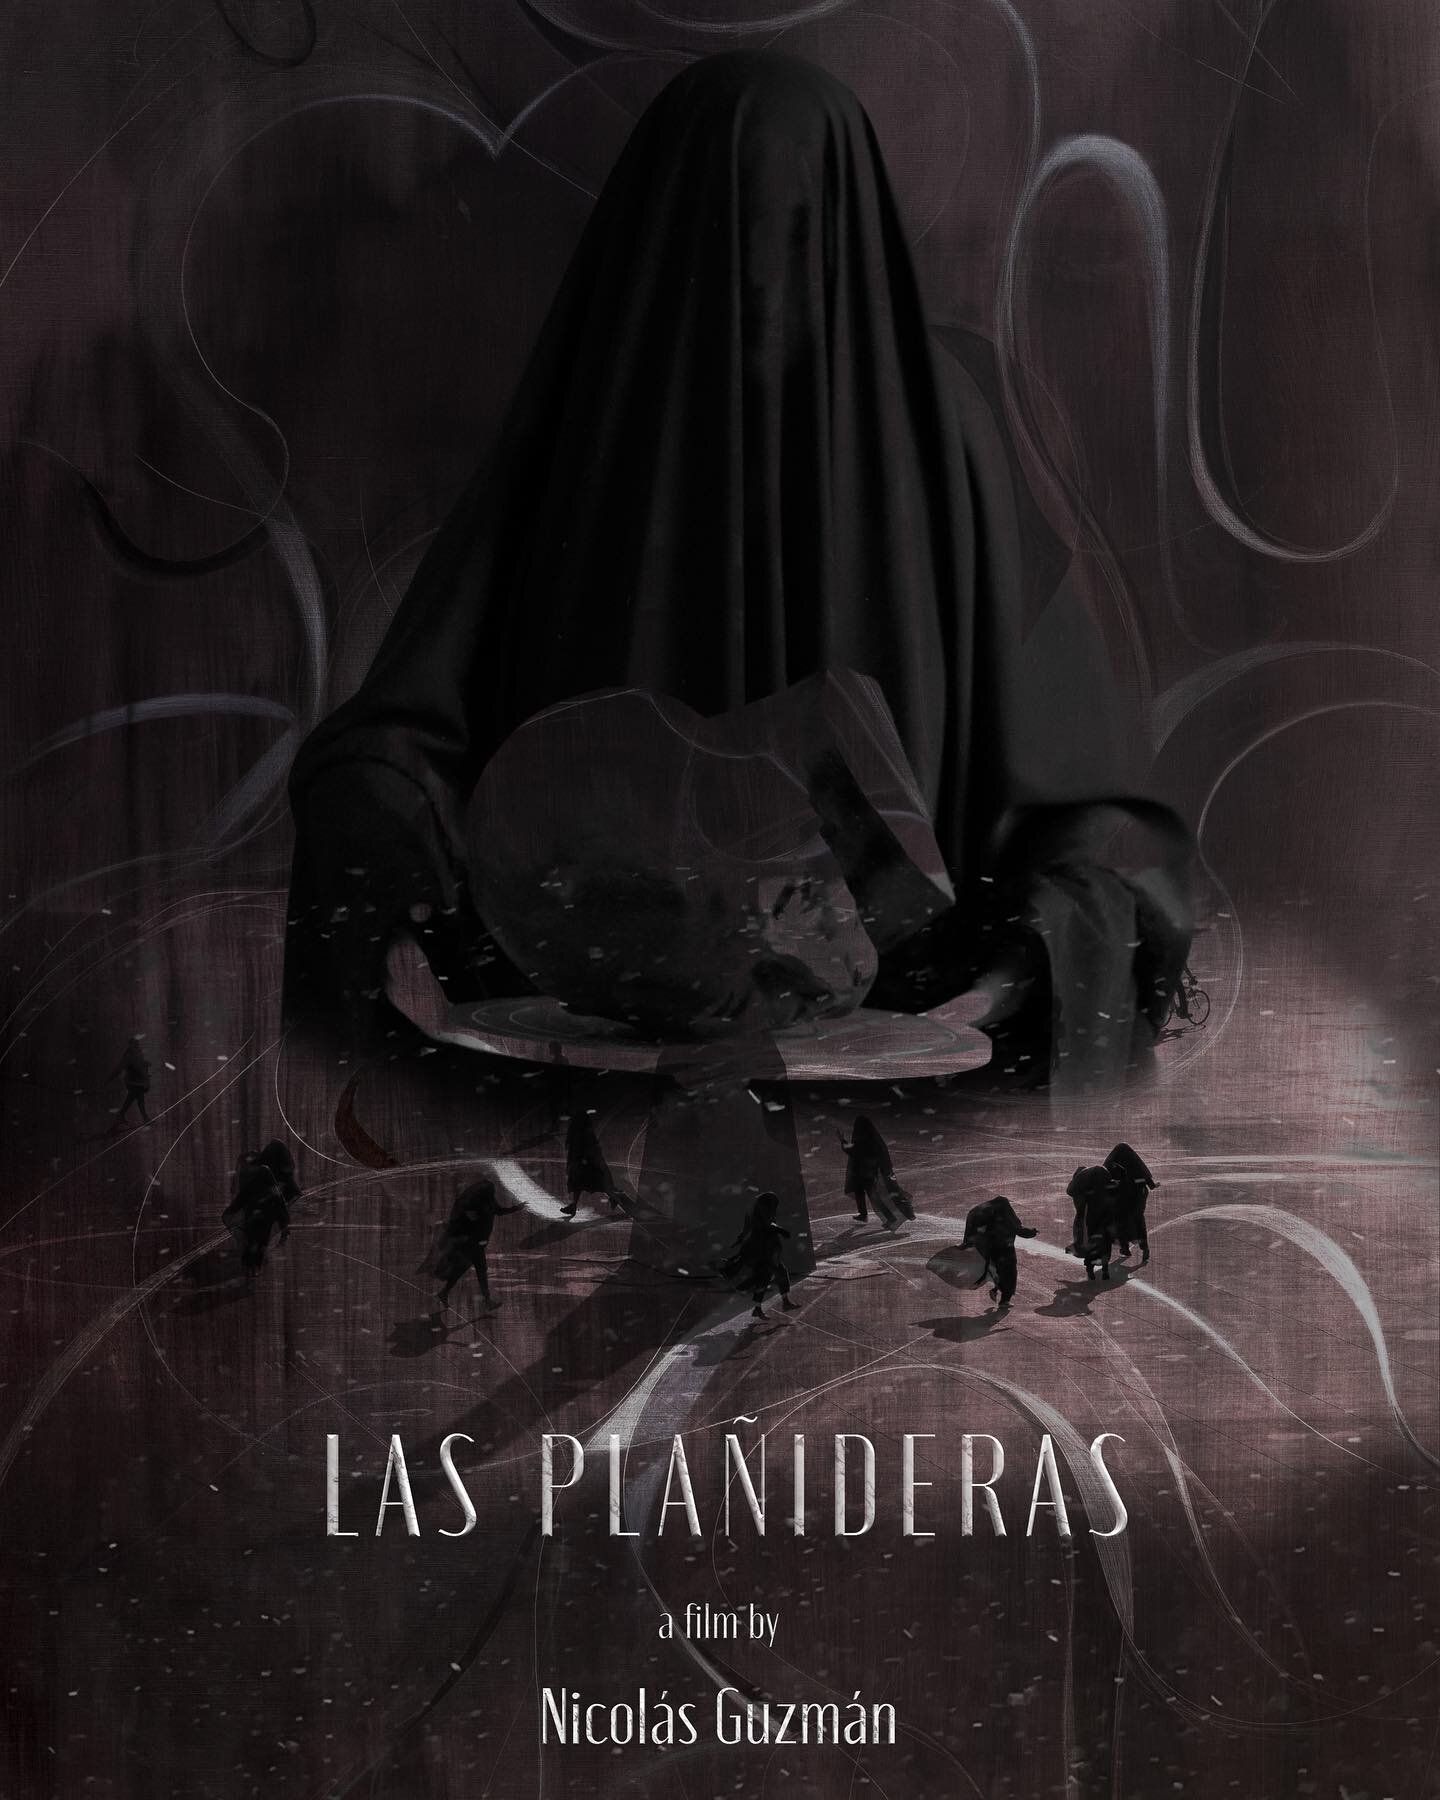 &ldquo;Las Pla&ntilde;ideras / The Mourners&rdquo; Trailer and poster. Coming 2023 to Film Festivals. Directed by @guzman_nicolas and produced by me and Morphable Studios, music by @ju_nto #shortfilm #filmfestivals #experimental #posterdesign #poster